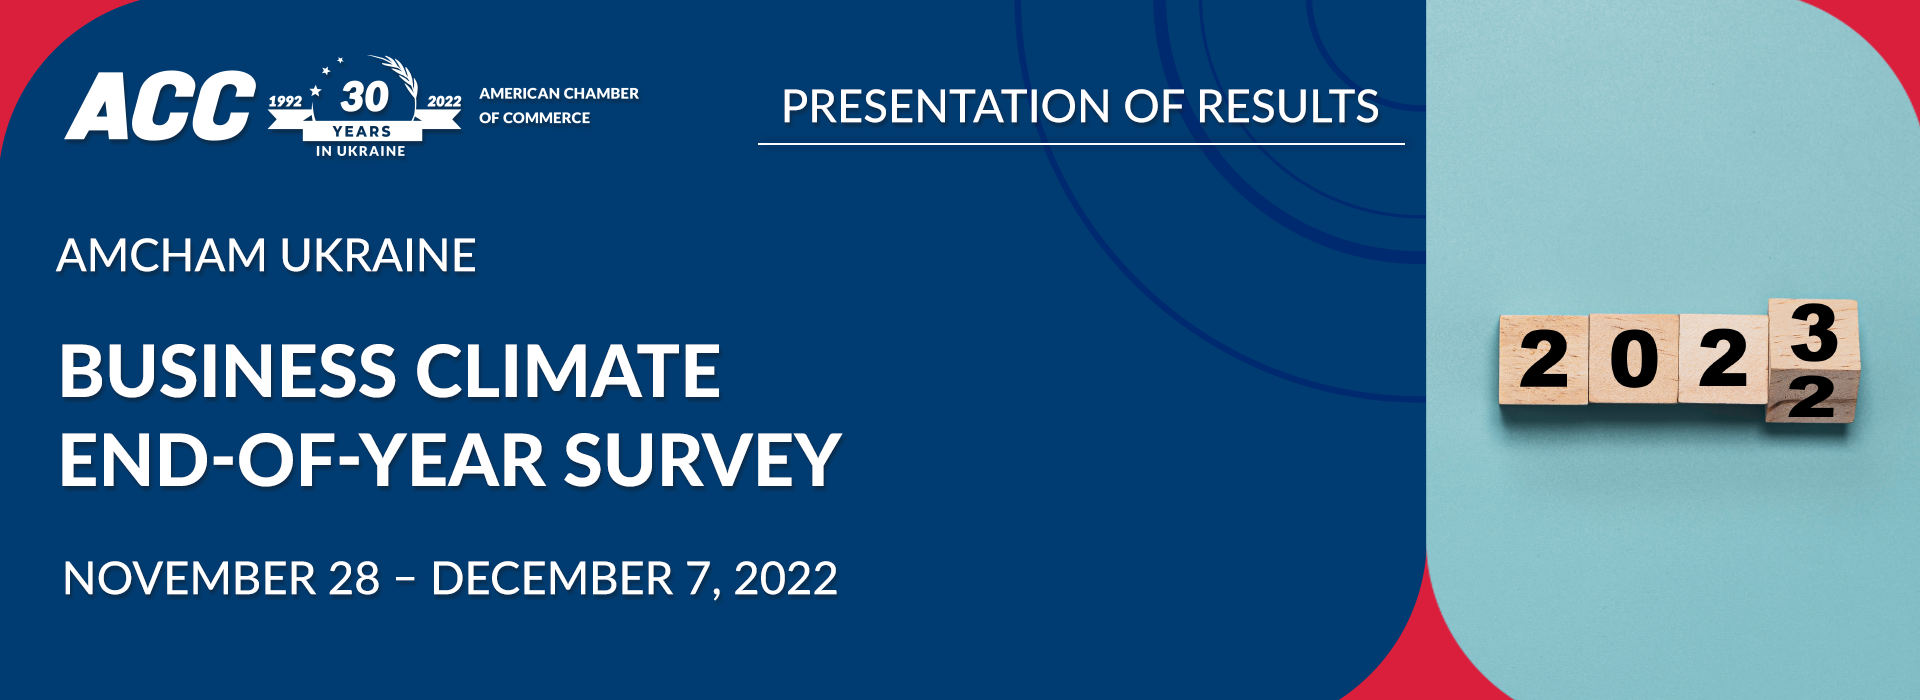 AmCham Ukraine Business Climate End-of-Year Survey Results